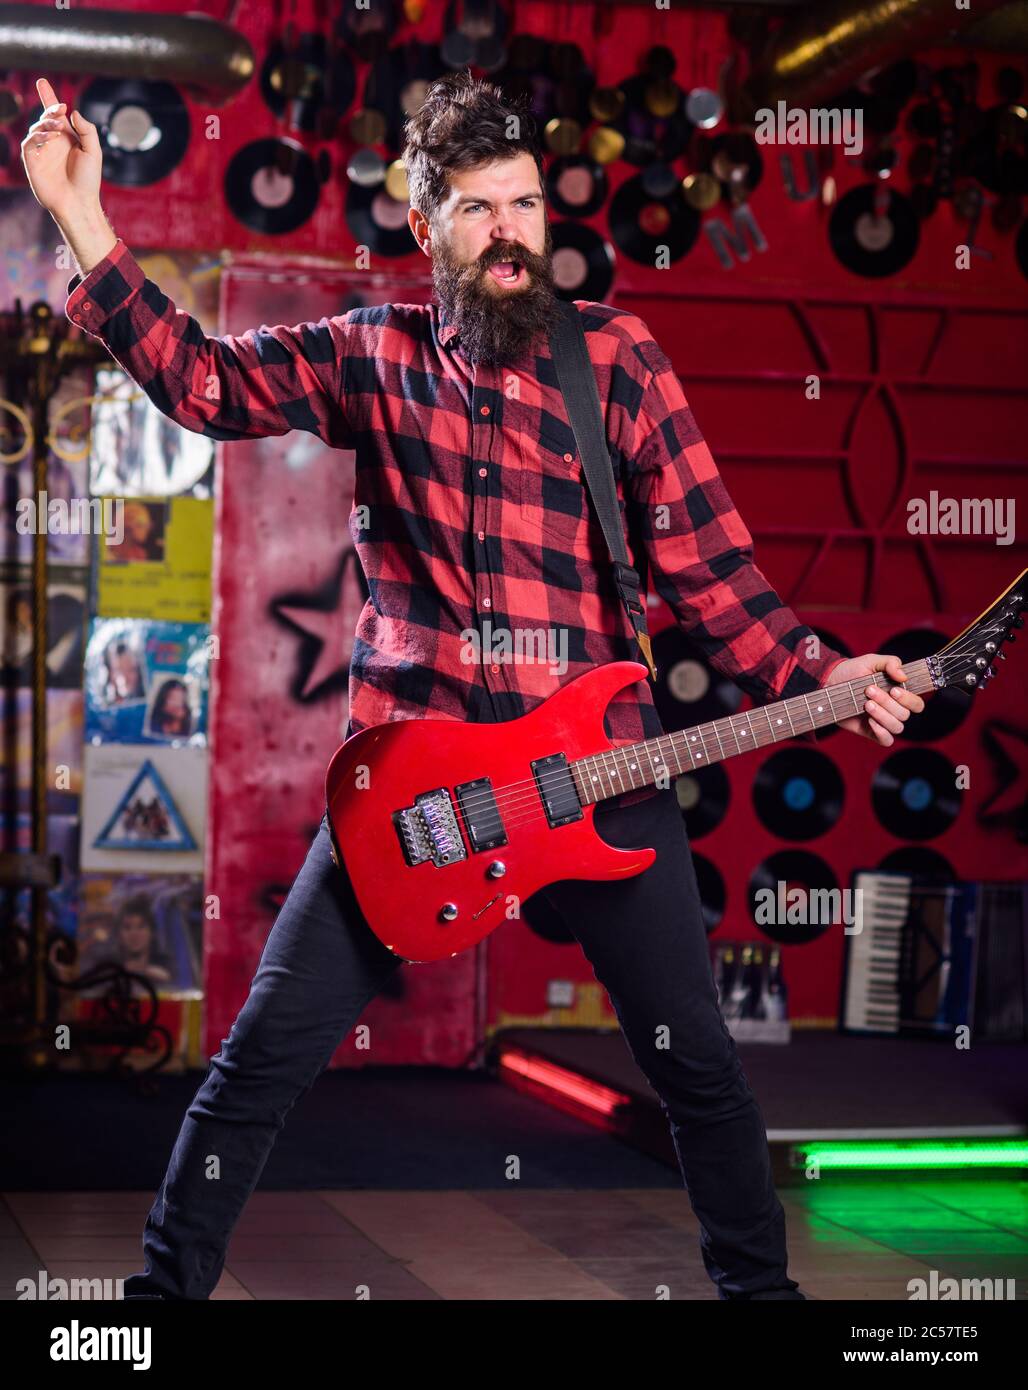 Frontman concept. Musician full of energy, soloist, singer. Musician with beard play electric guitar. Man with shouting face play guitar, singing song, play music, music club background. Stock Photo